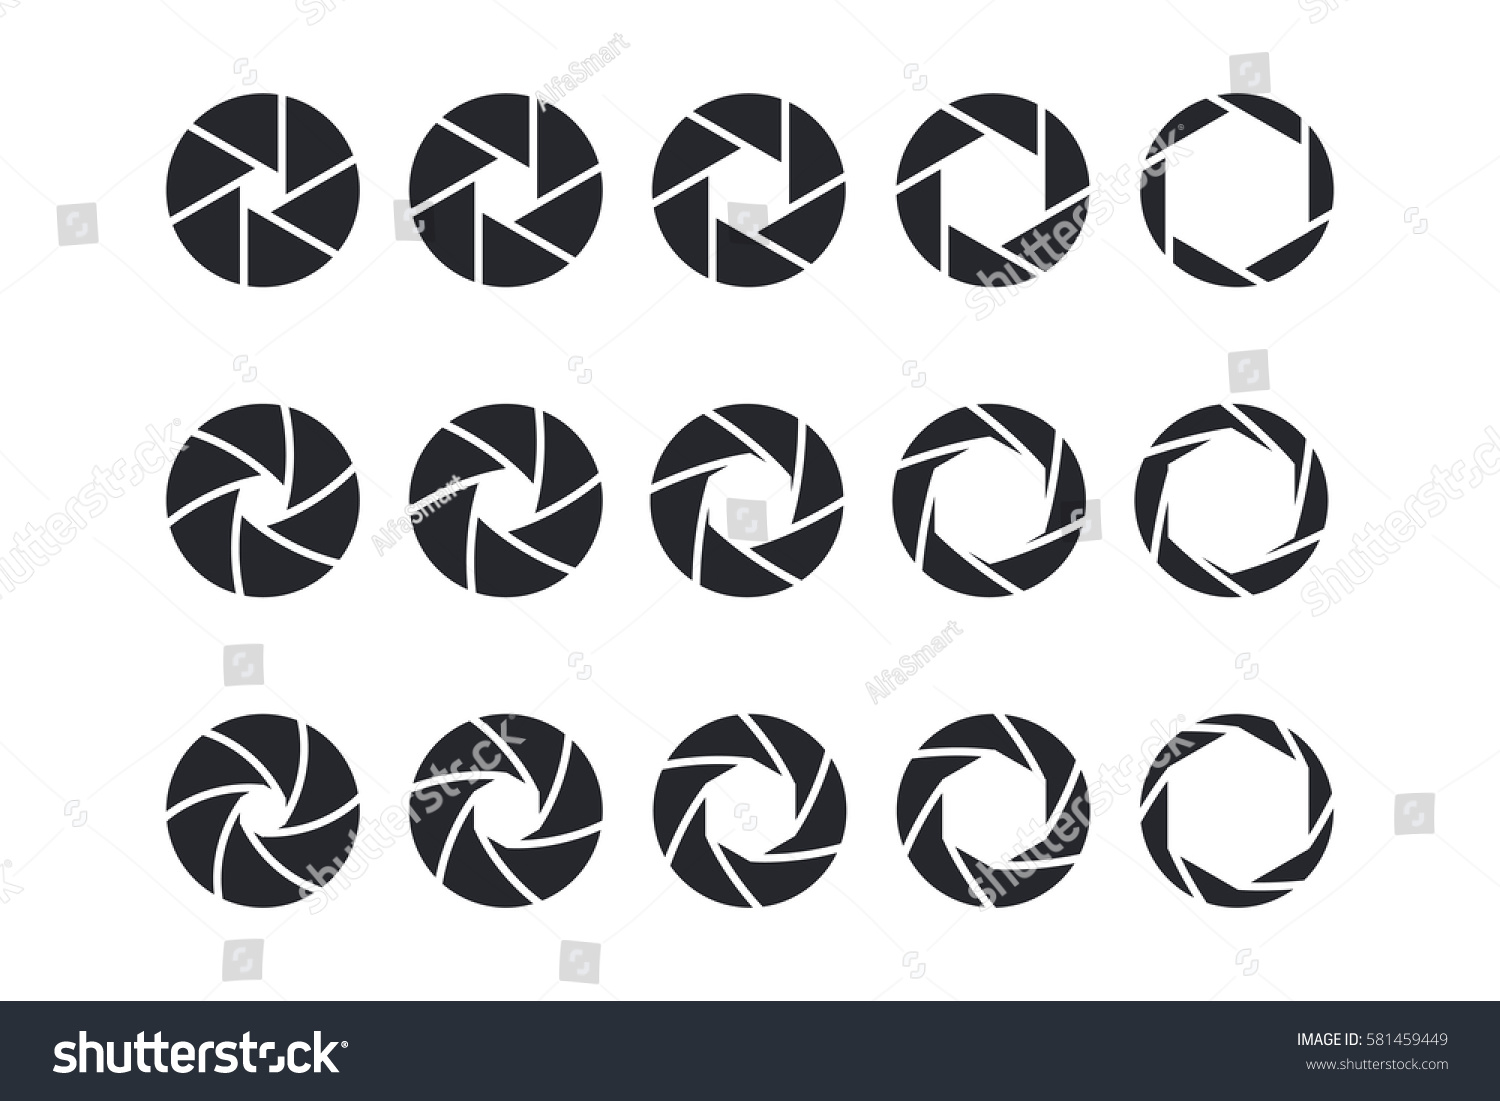 207,207 Camera lens icon Images, Stock Photos & Vectors | Shutterstock